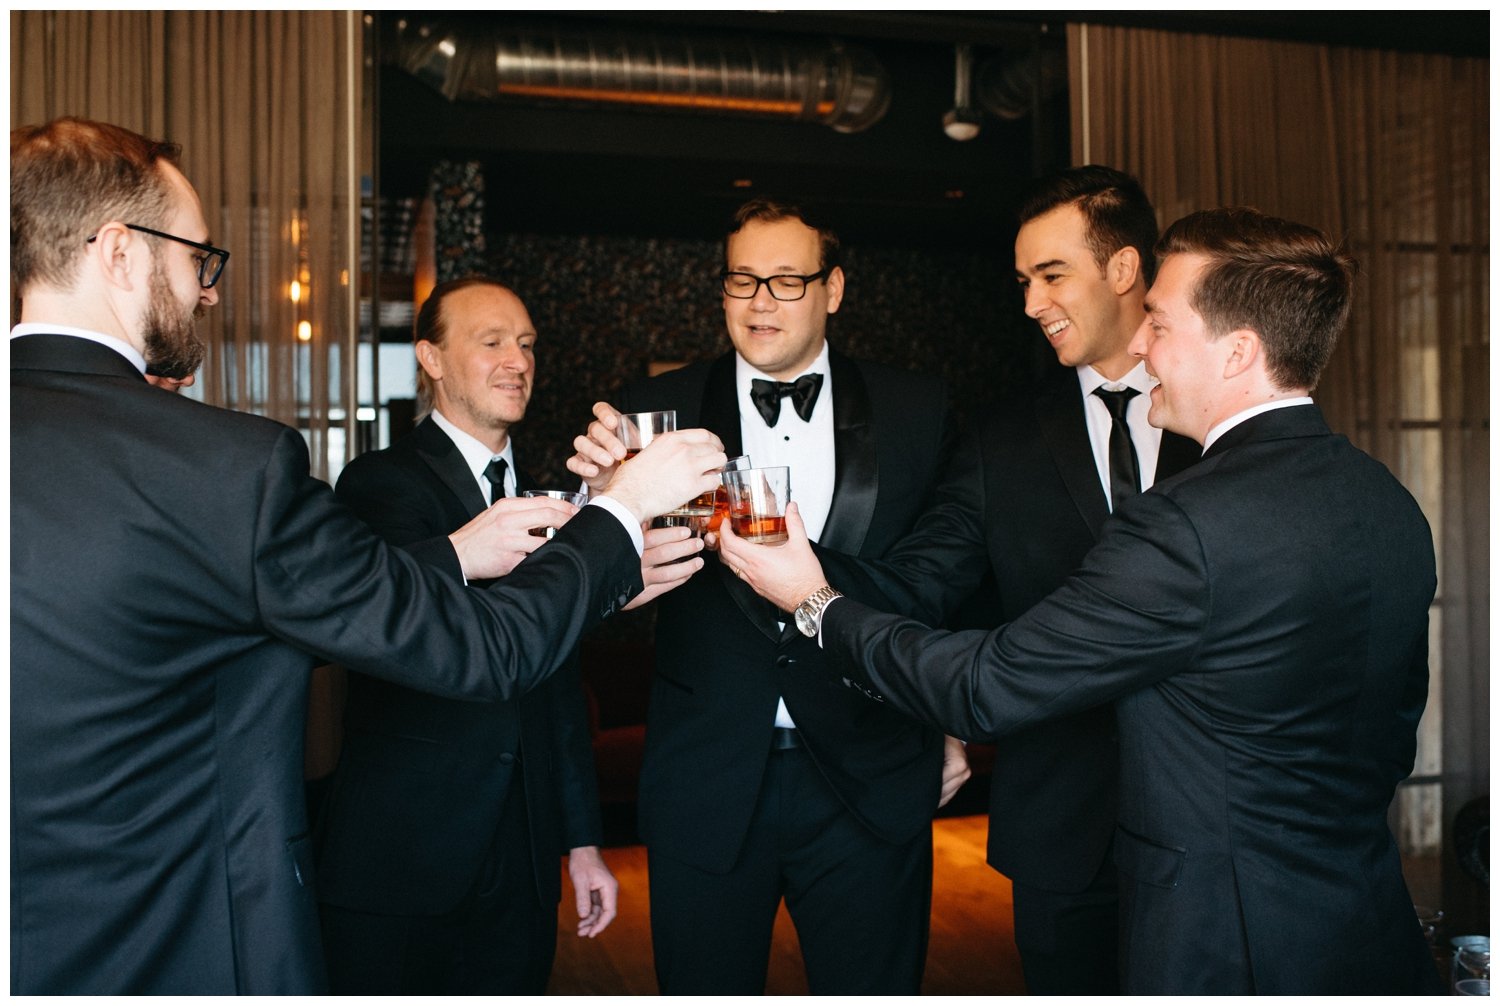 The groom and groomsmen toast scotch at the Ponce City Market wedding